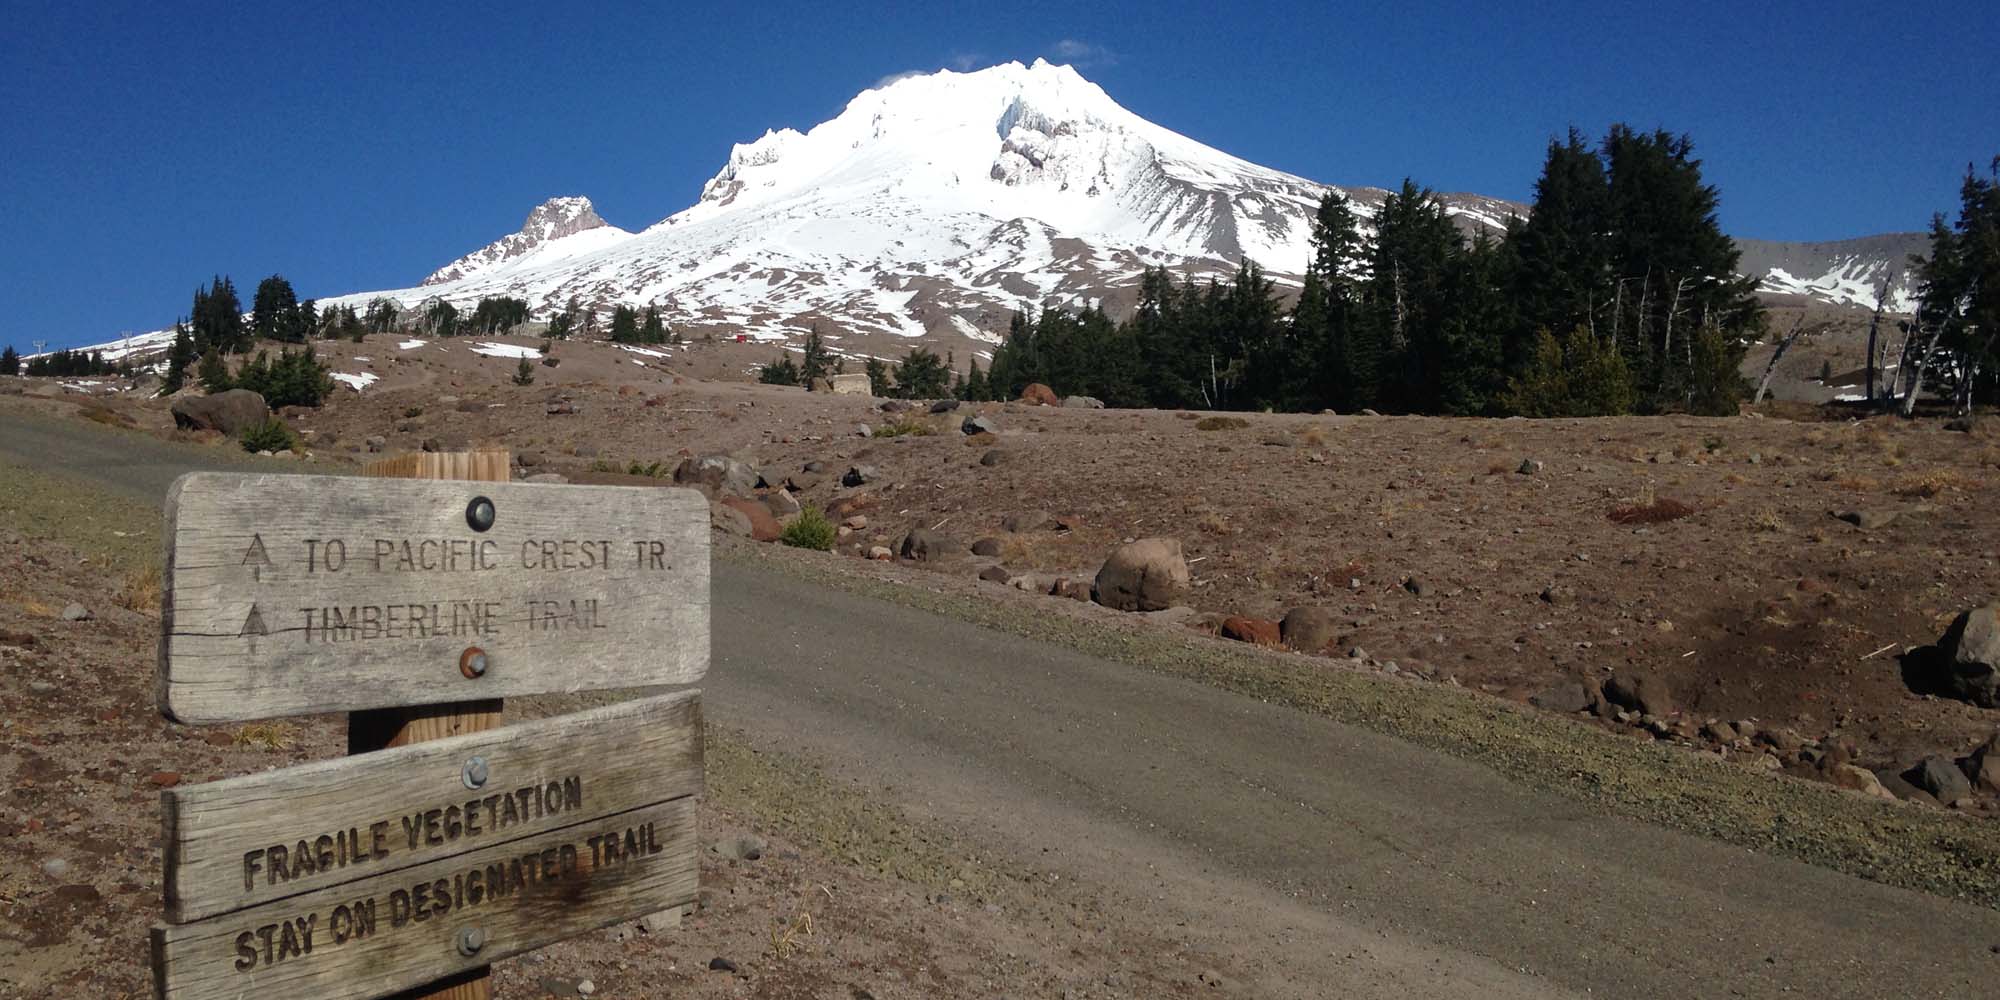 A view of the Pacific Crest Trail with Mt. Hood in the background.